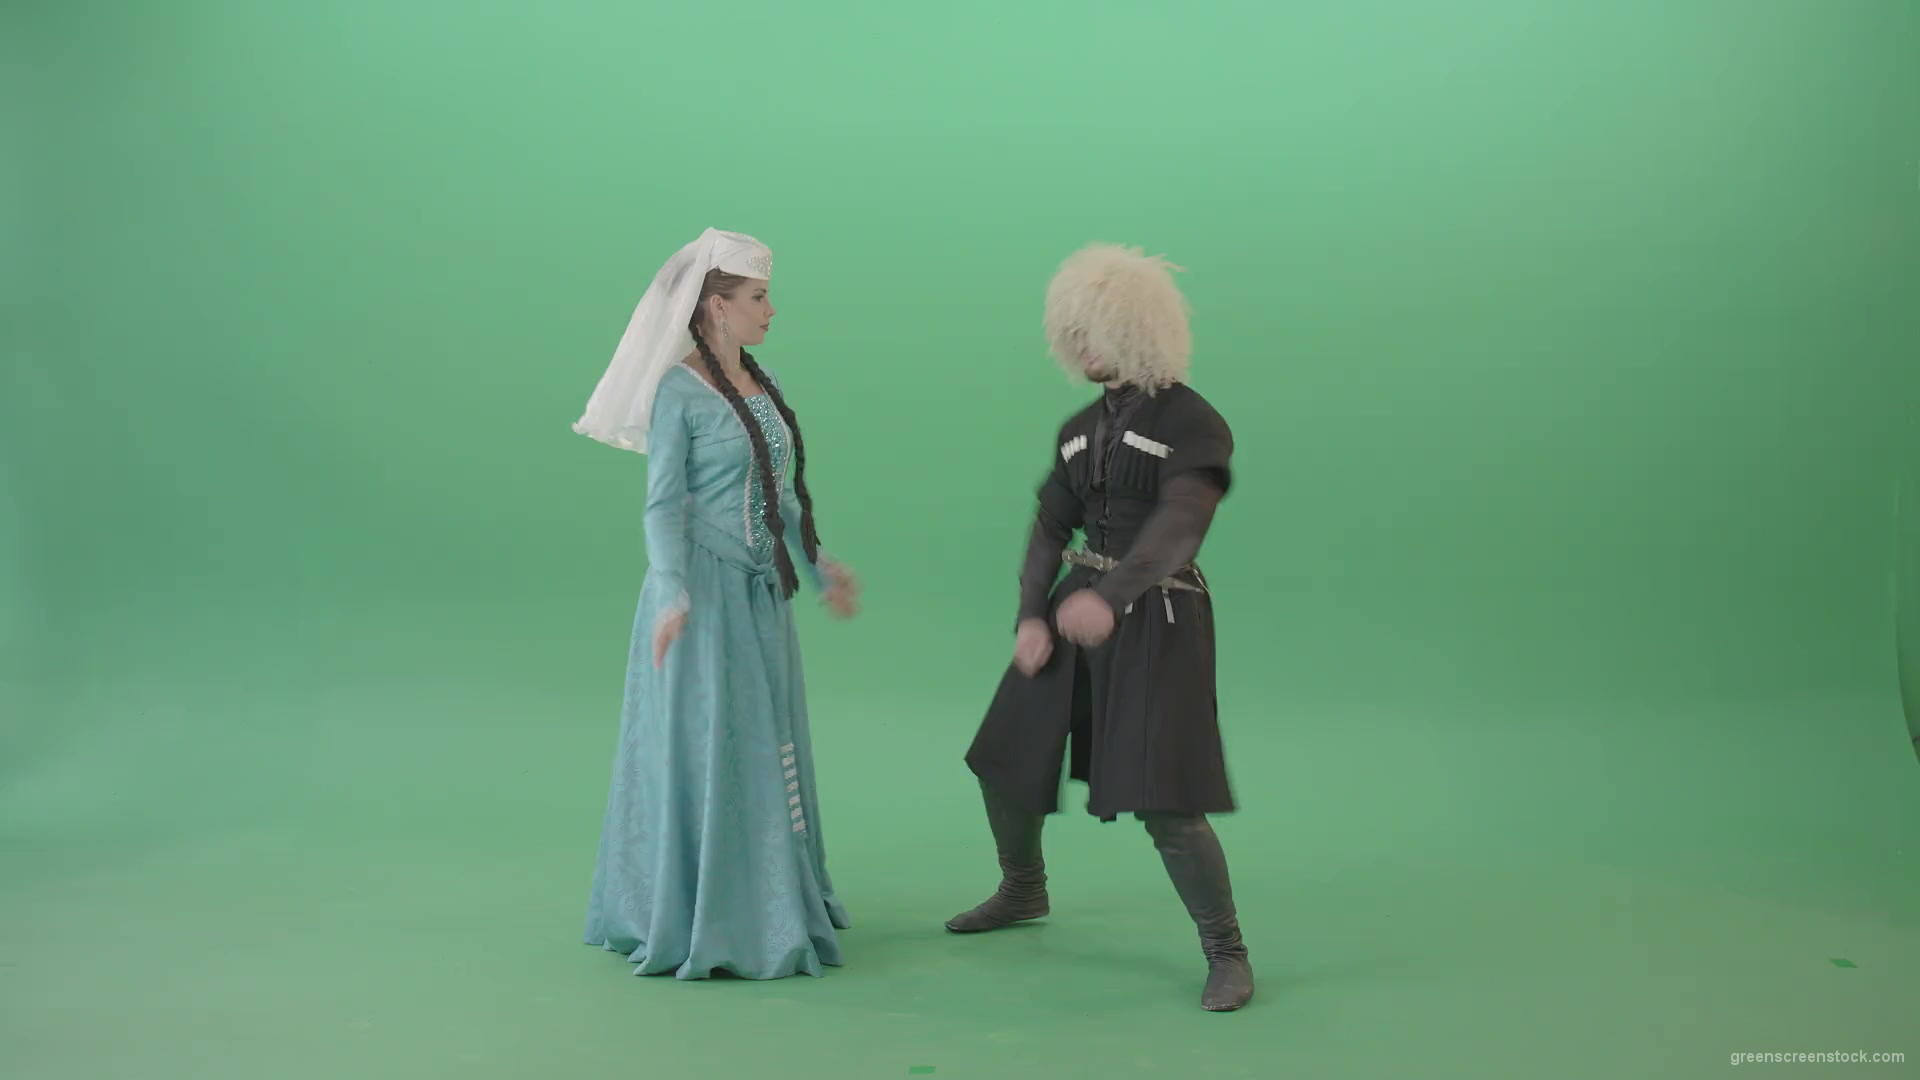 Gerogian-people-funny-dancing-with-smile-in-folk-dress-isolated-on-Green-Screen-4K-Video-Footage-1920_001 Green Screen Stock